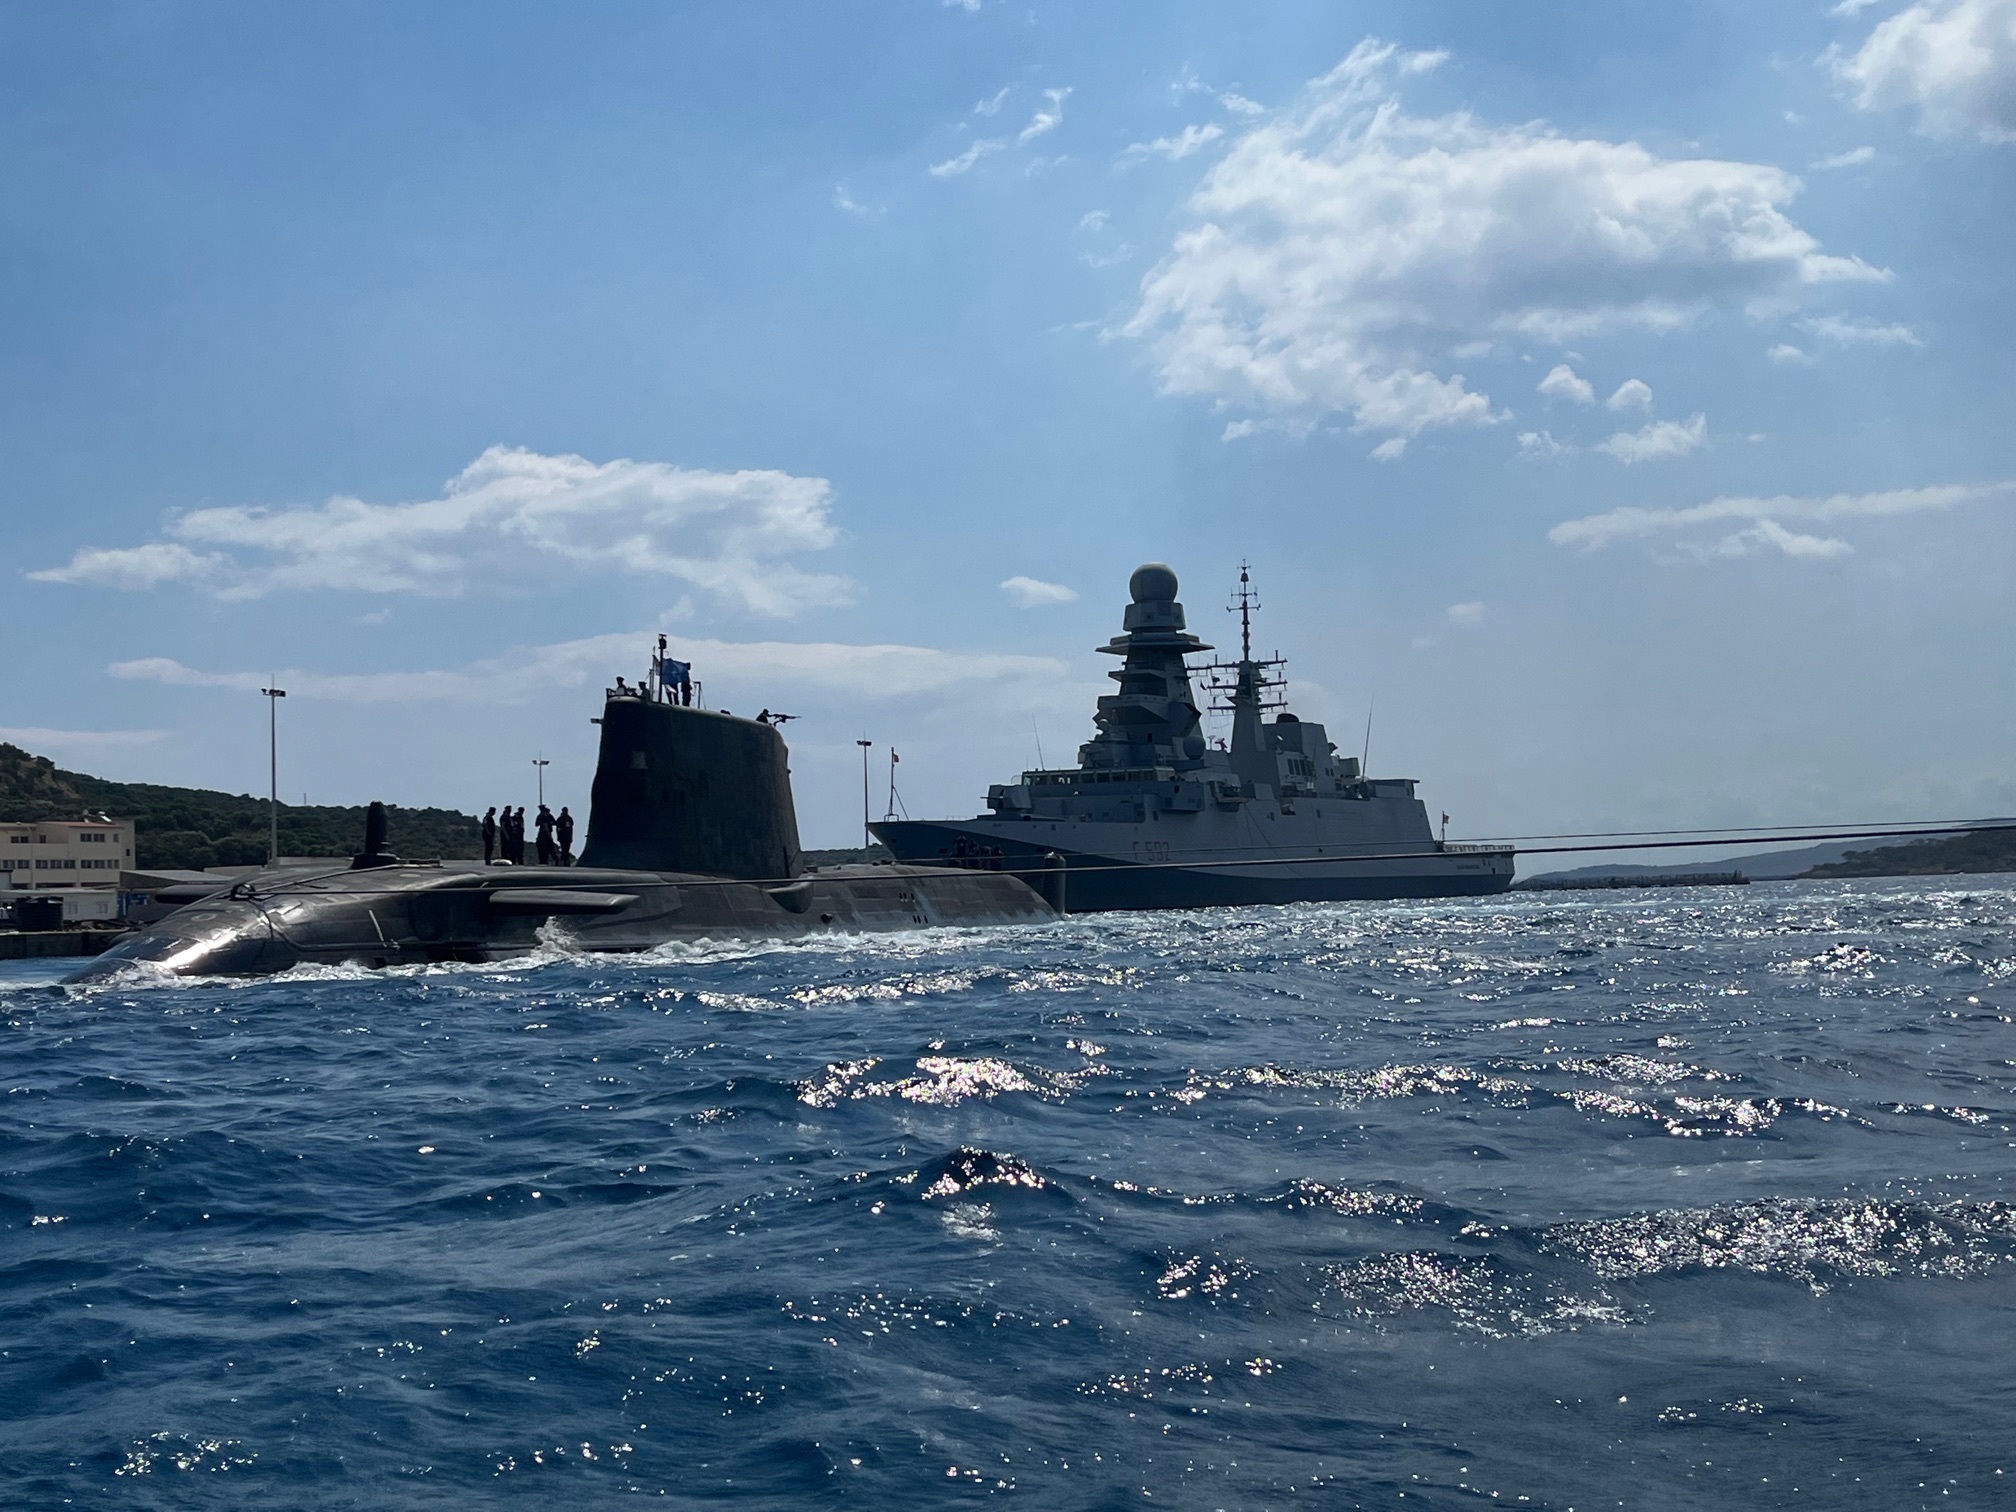 HMS Audacious departs Souda Bay in Crete ahead of NATO training and operations in the Mediterranean. The Astute-class submarine was on her first operational deployment from January 2022. The Italian frigate Carlo Margottini can be seen in the background.